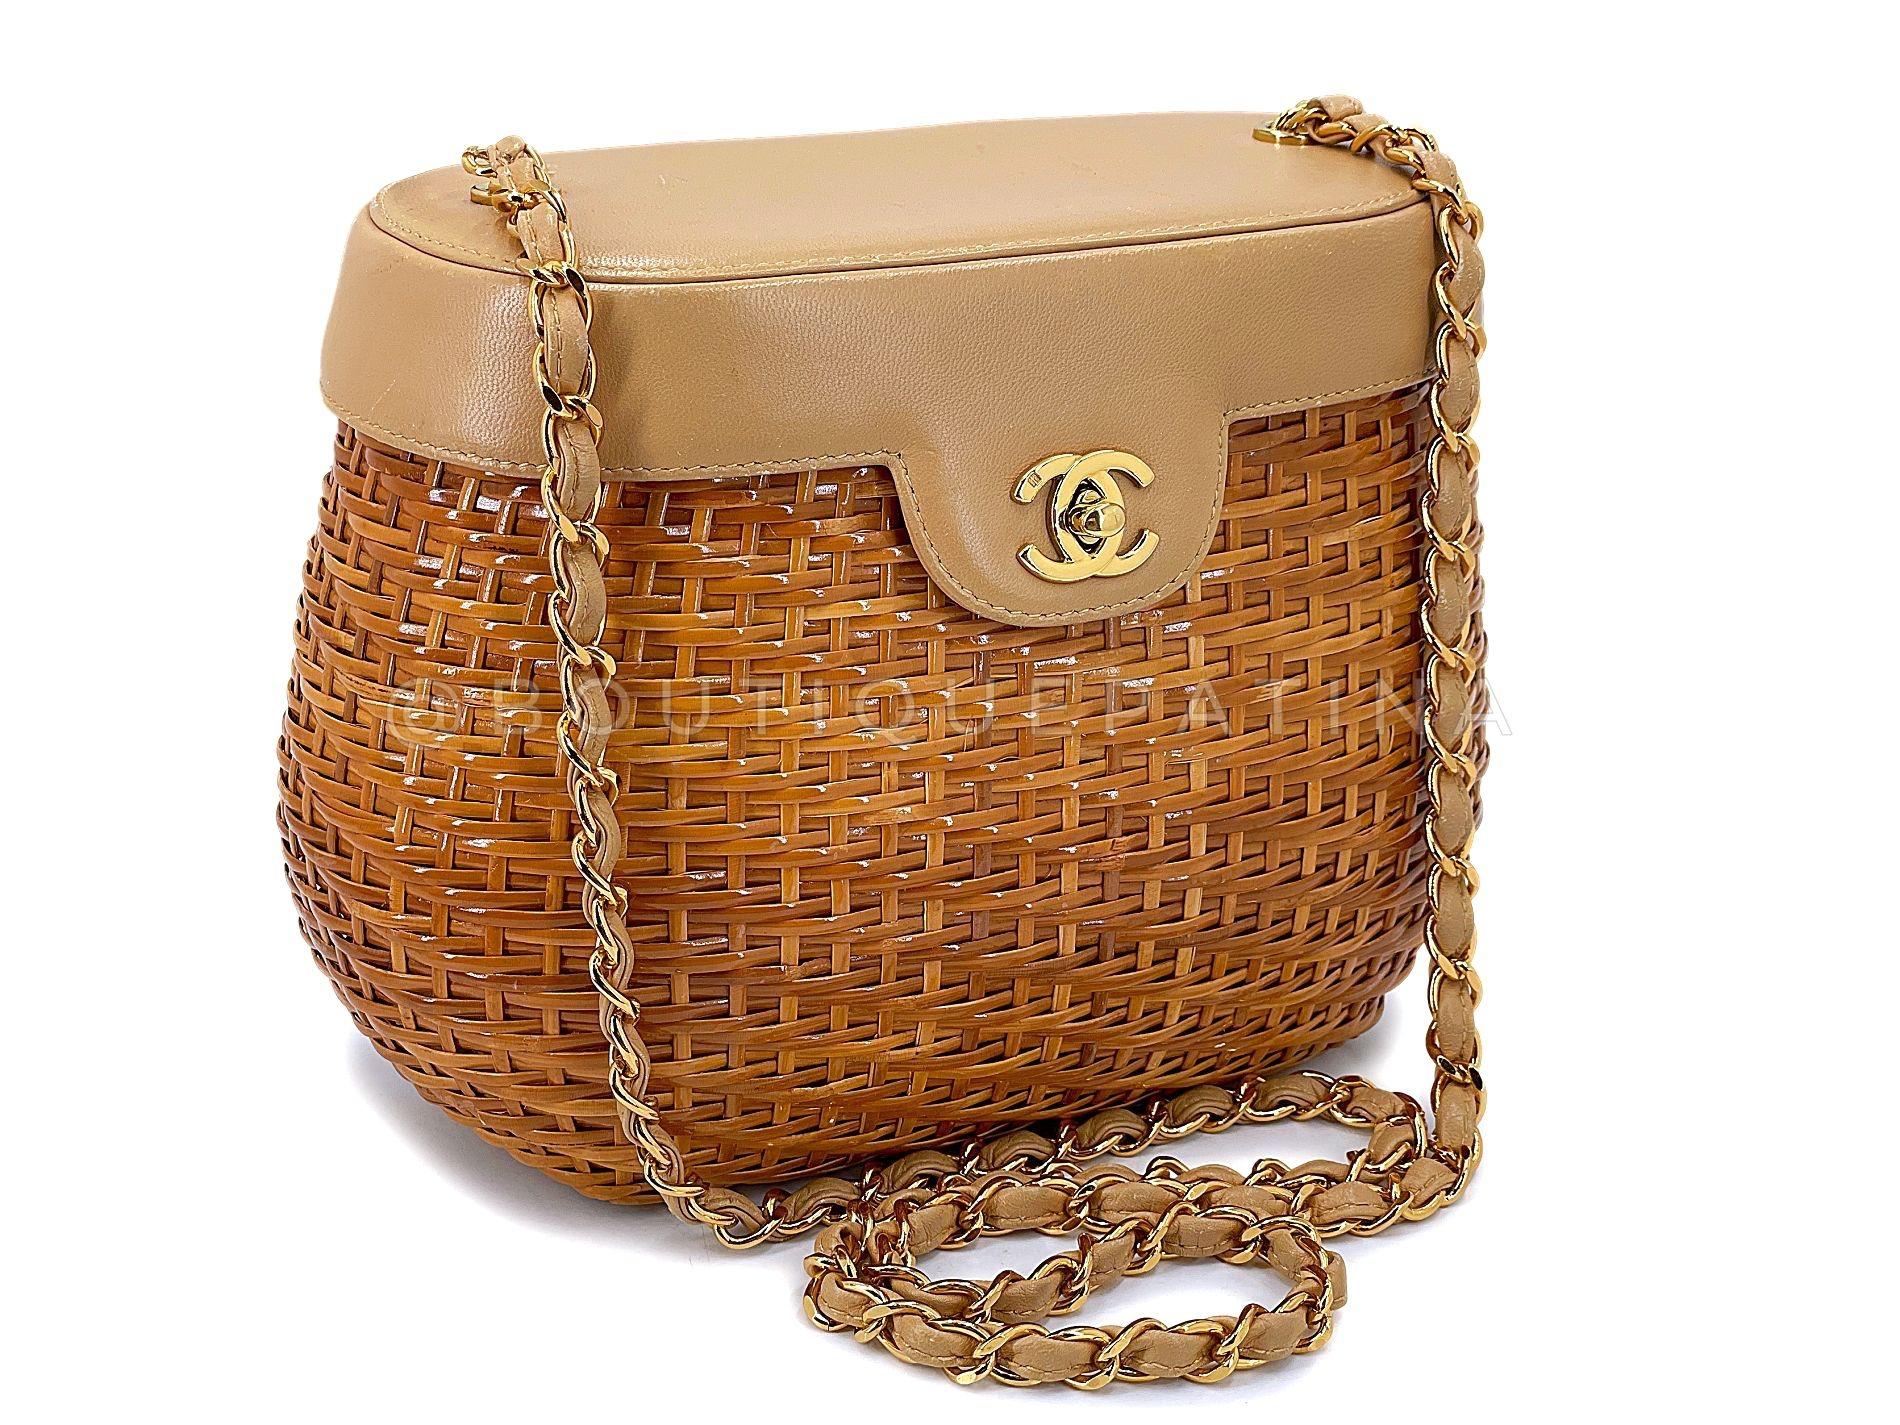 Store item: 67876
This Chanel 1997 Vintage Wicker and Beige Lambskin Basket Vanity Bag is adorable as a crossbody. A unique rounded basket shape bag with a caramel brown 